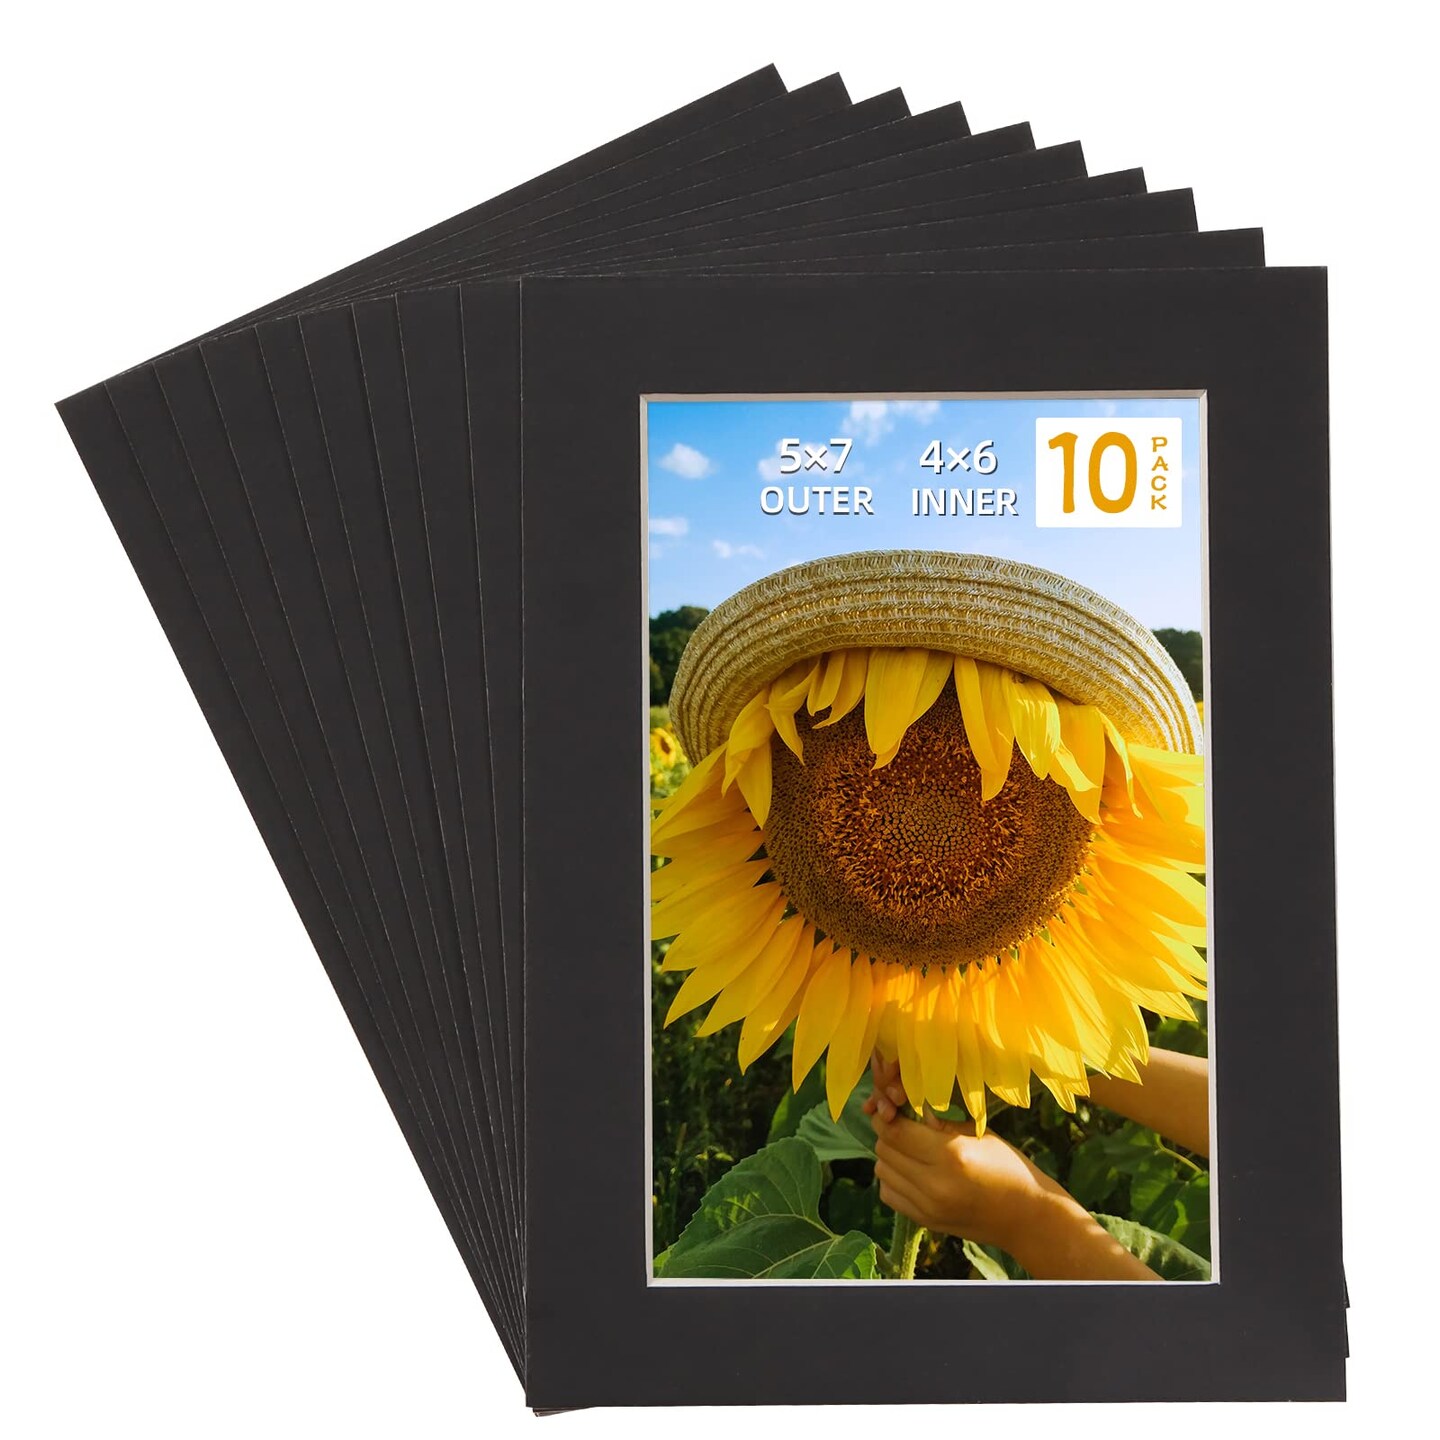 HOTUO 10 Pack Acid Free Black Picture Frame Mats, Pre-Cut 5x7 Picture Mats with Ivory Core Bevel Cut for 4x6 Photo, Signature Friendly 4 Ply Thickness Photo Mat for Frames/Artwork/Prints/Pictures